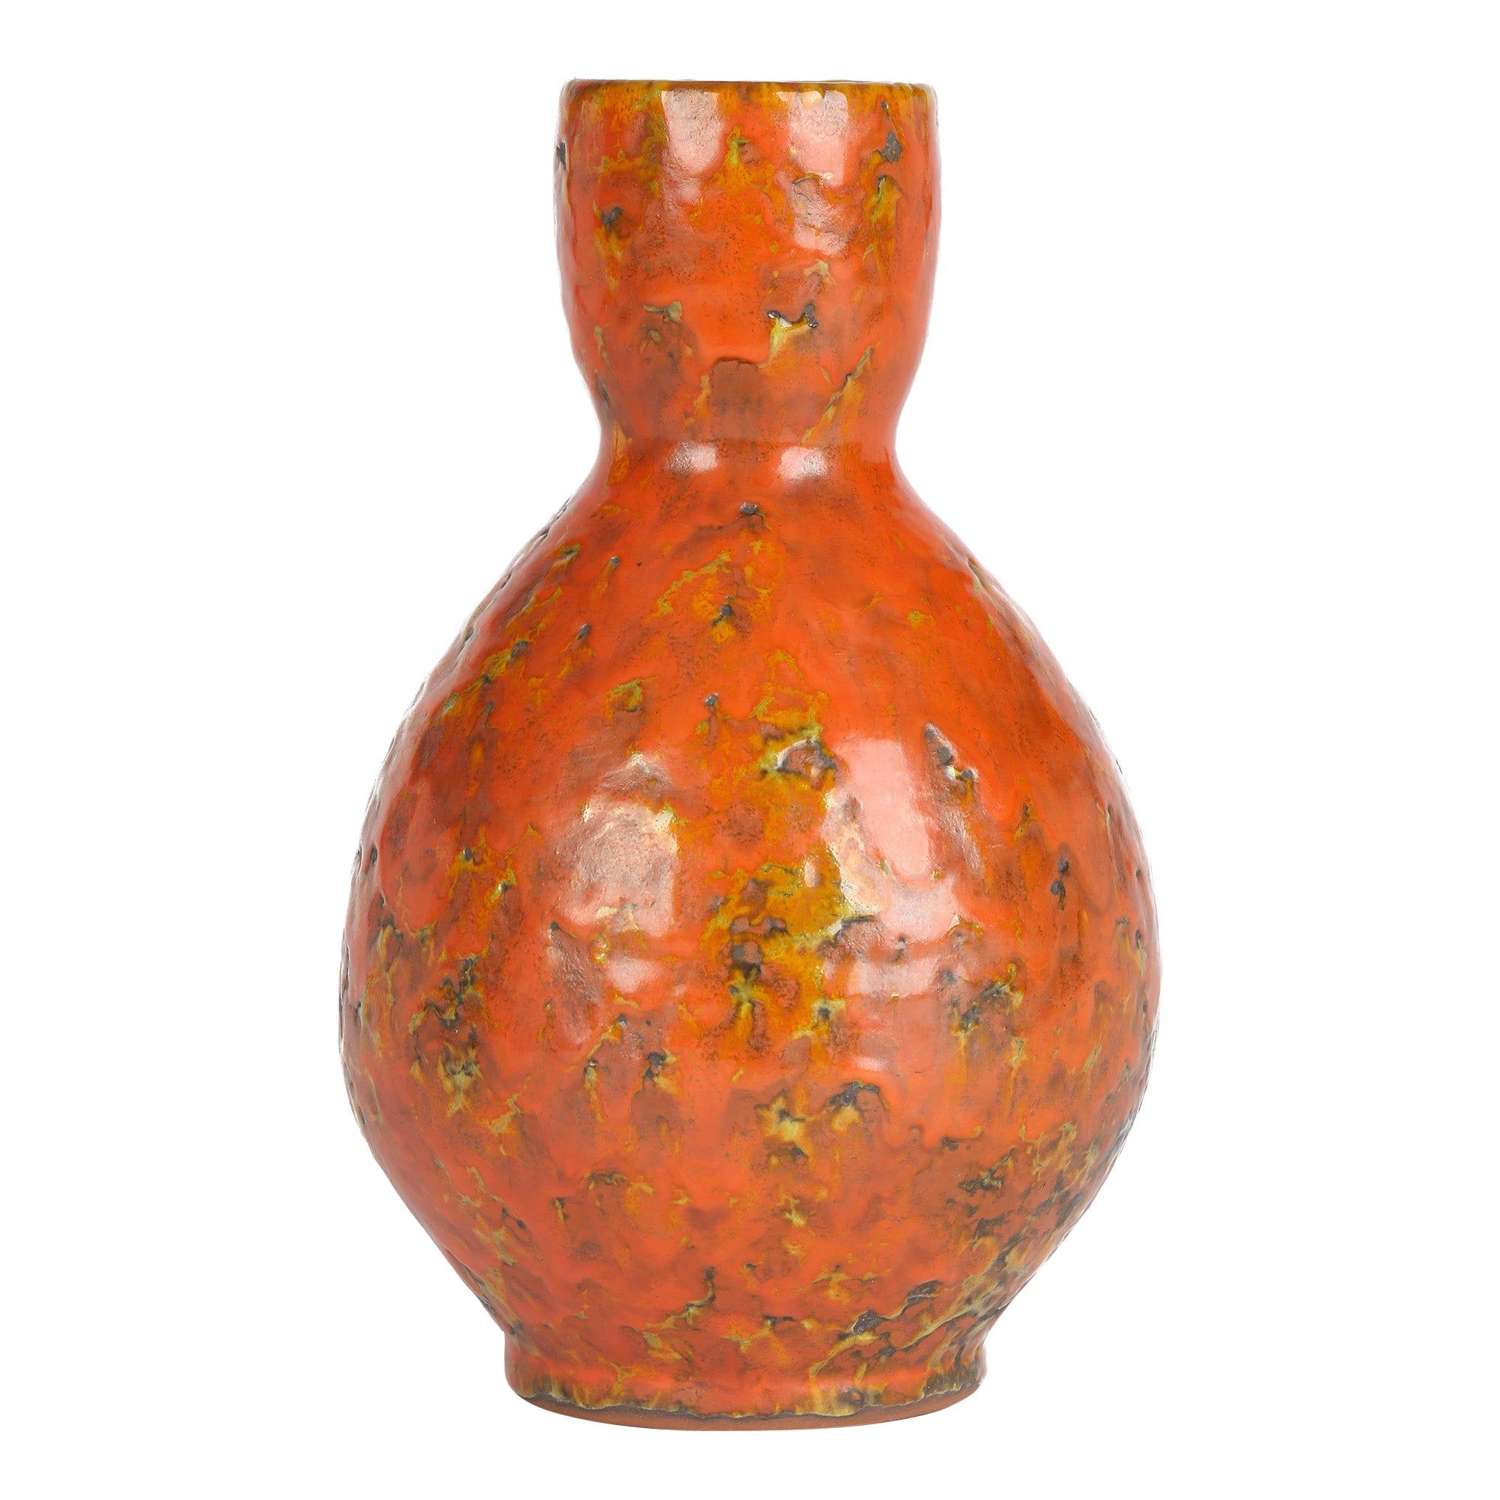 Continental, Possibly German, Mid-Century Orange Textured Art Pottery